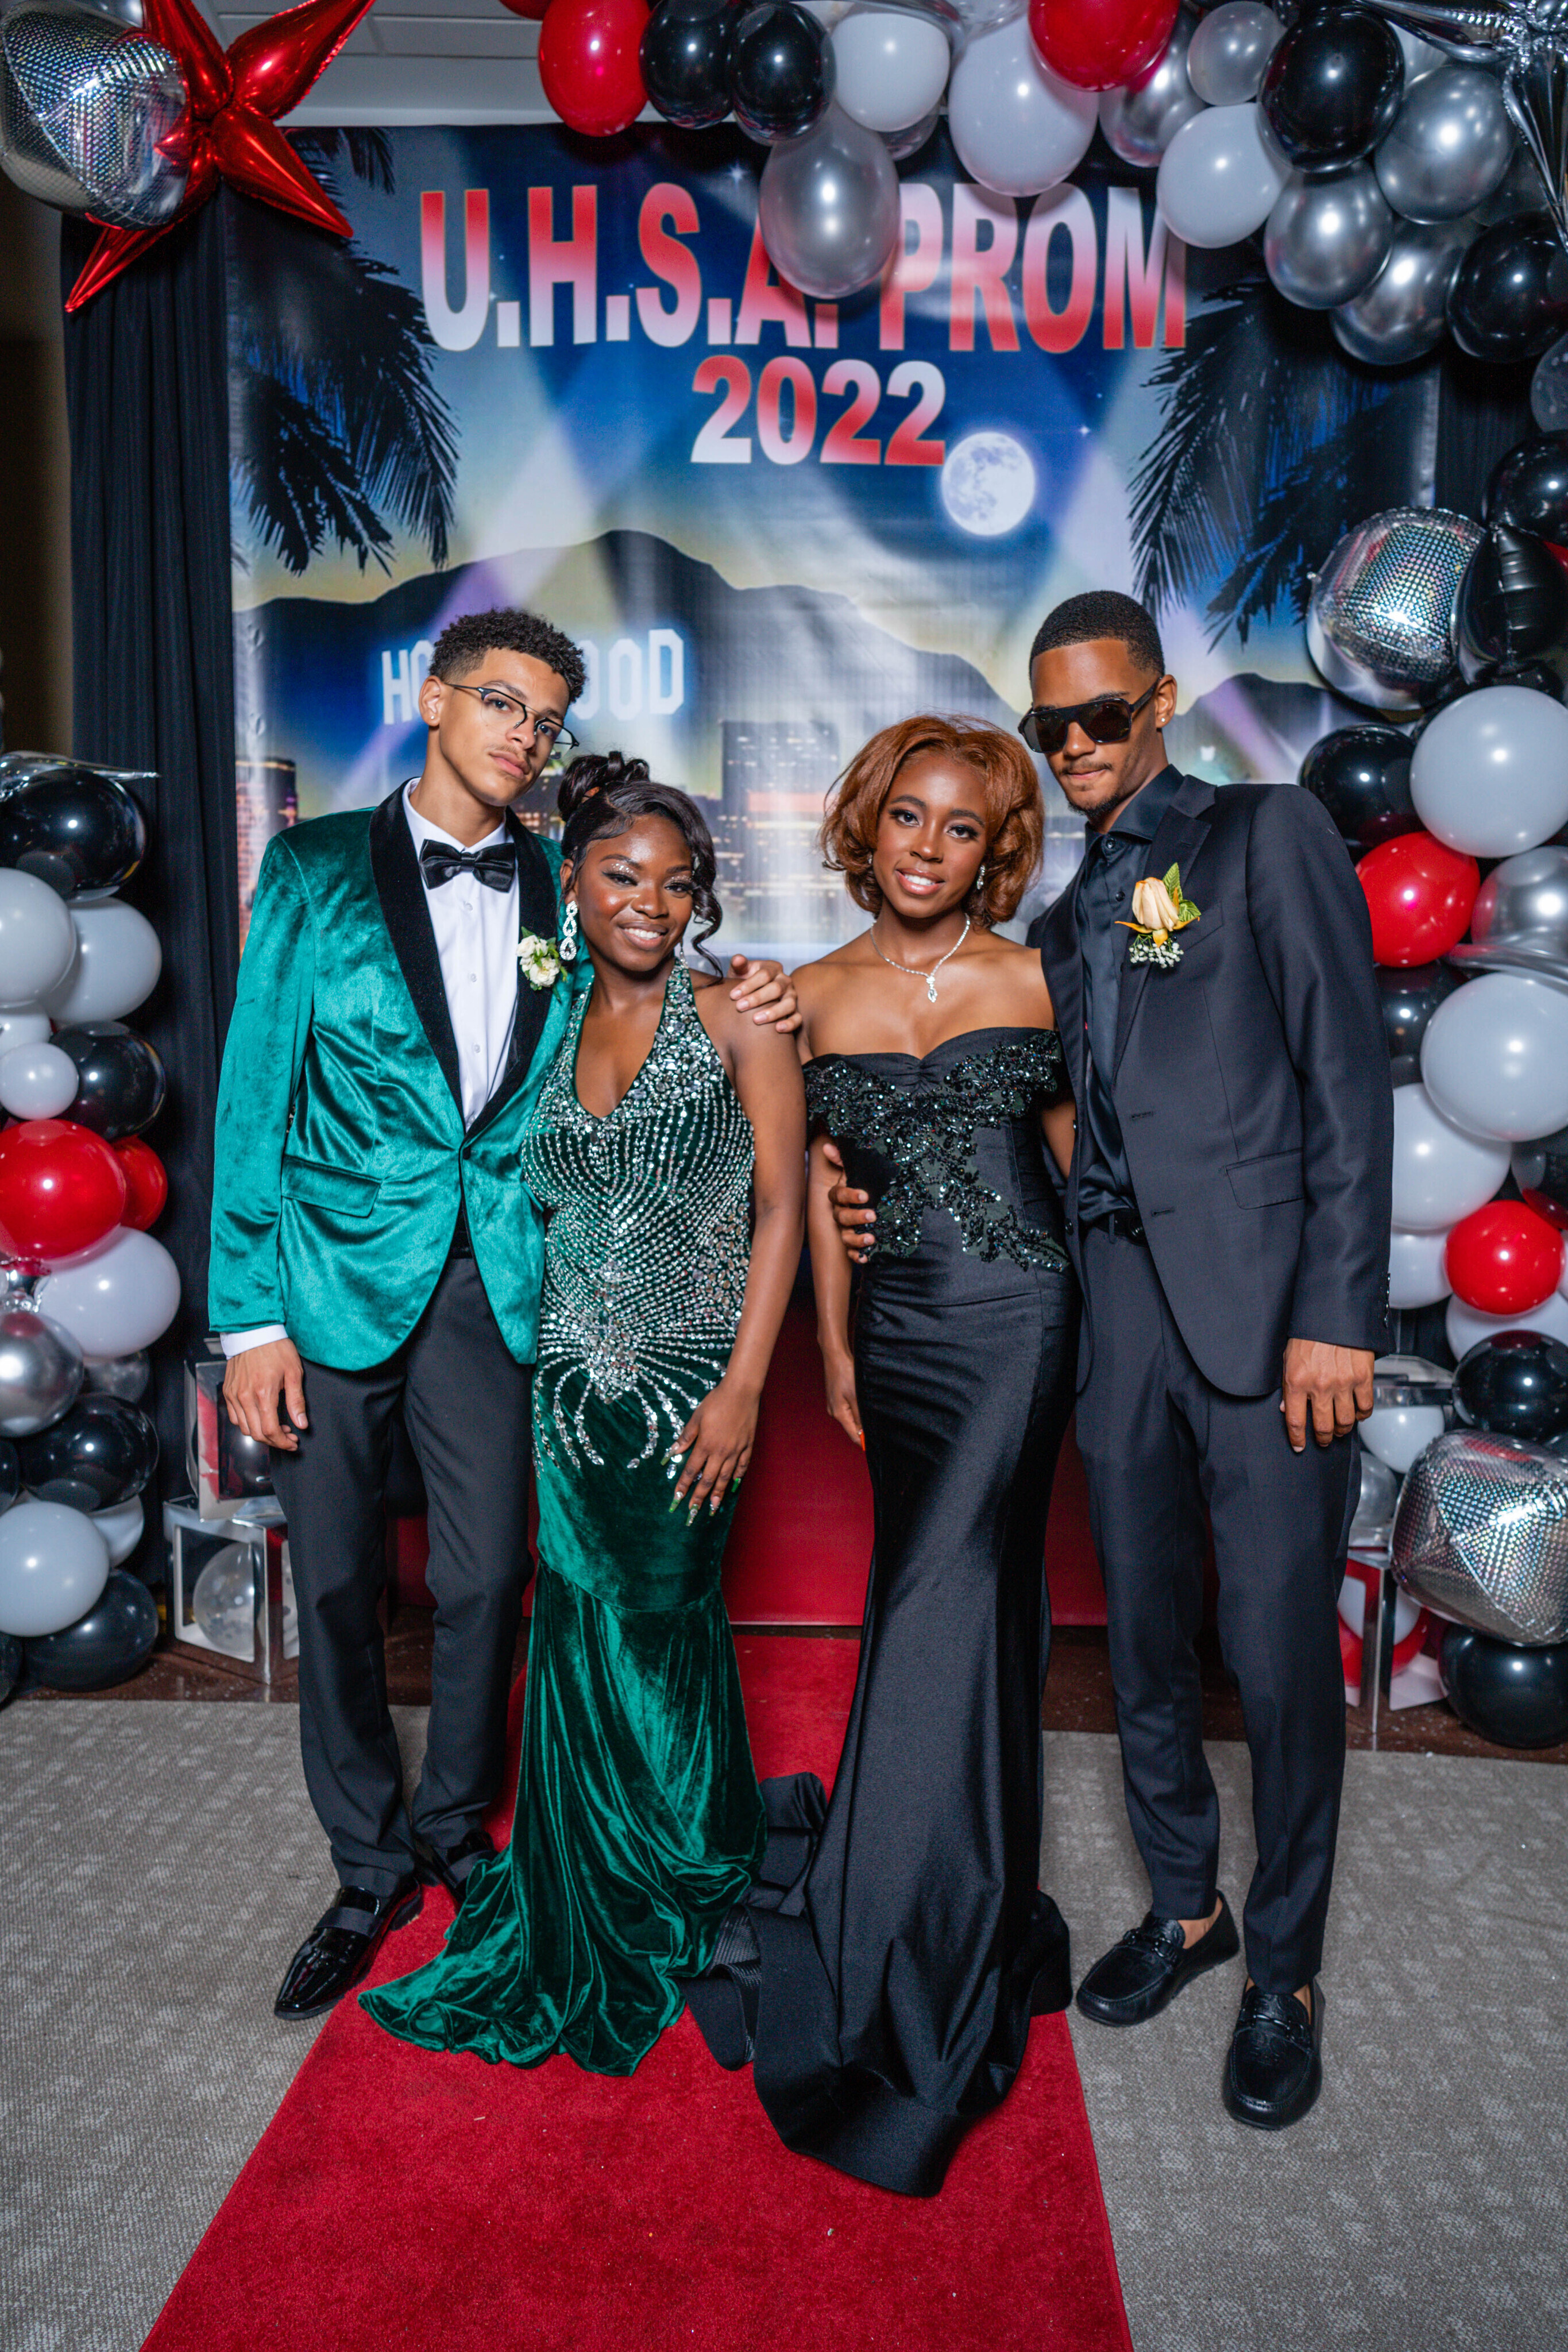 U 2022 Prom Group with Balloon Backdrop